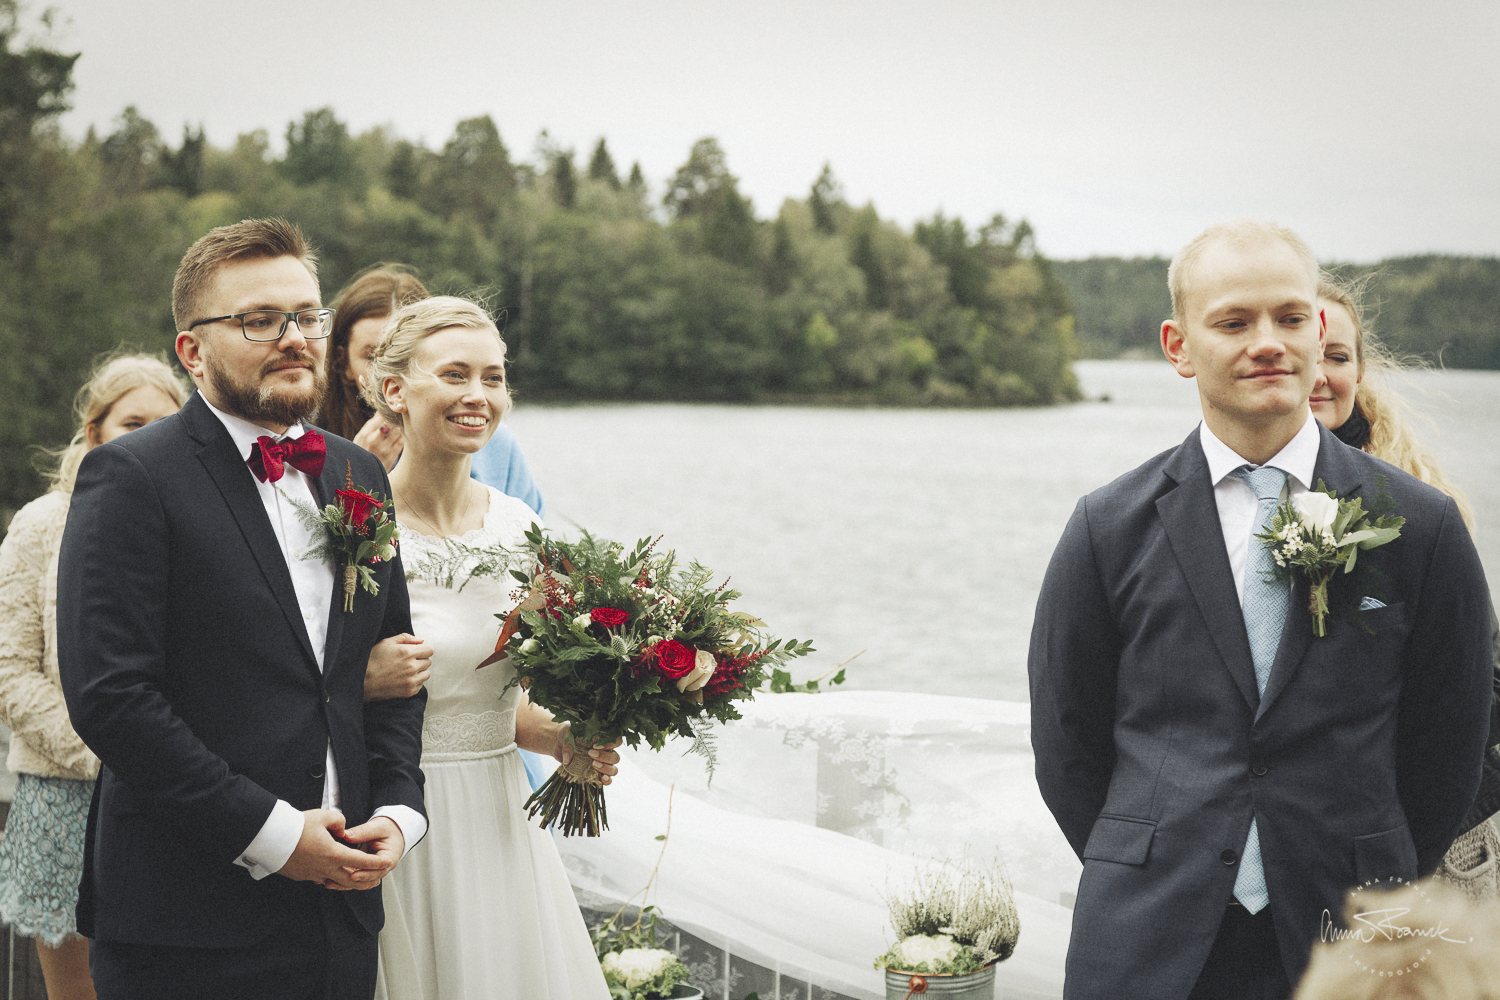 relaxed summer wedding in Stockholm - Anna Franck Photography 